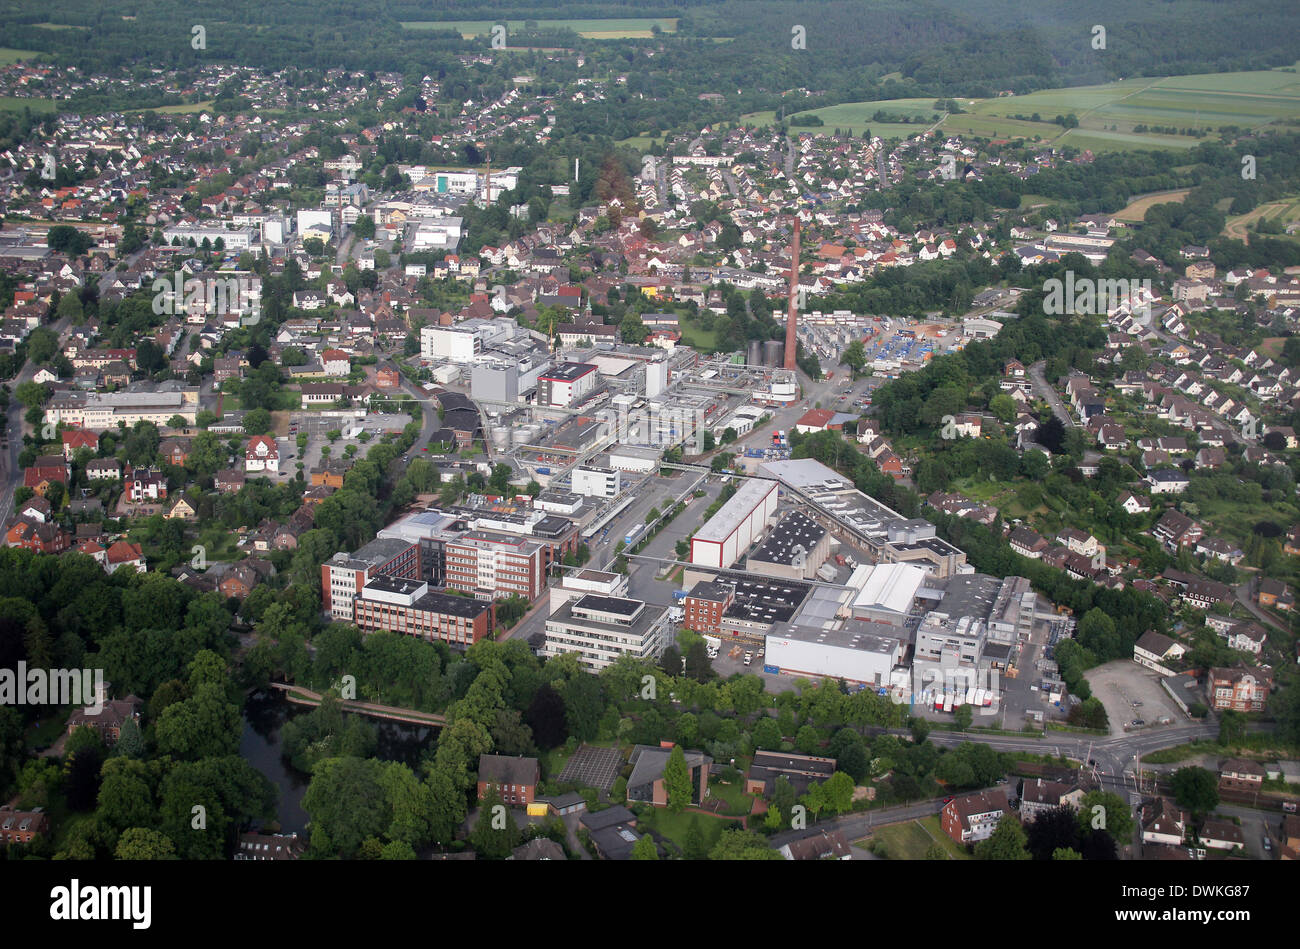 Aerial view of the Symrise company in Holzminden (Lower Saxony, Germany), picture taken at 17.06.2013 from a light aircraft. The company is a supplier of fragrances and flavorings and is one of the world's four largest in this industry. Stock Photo